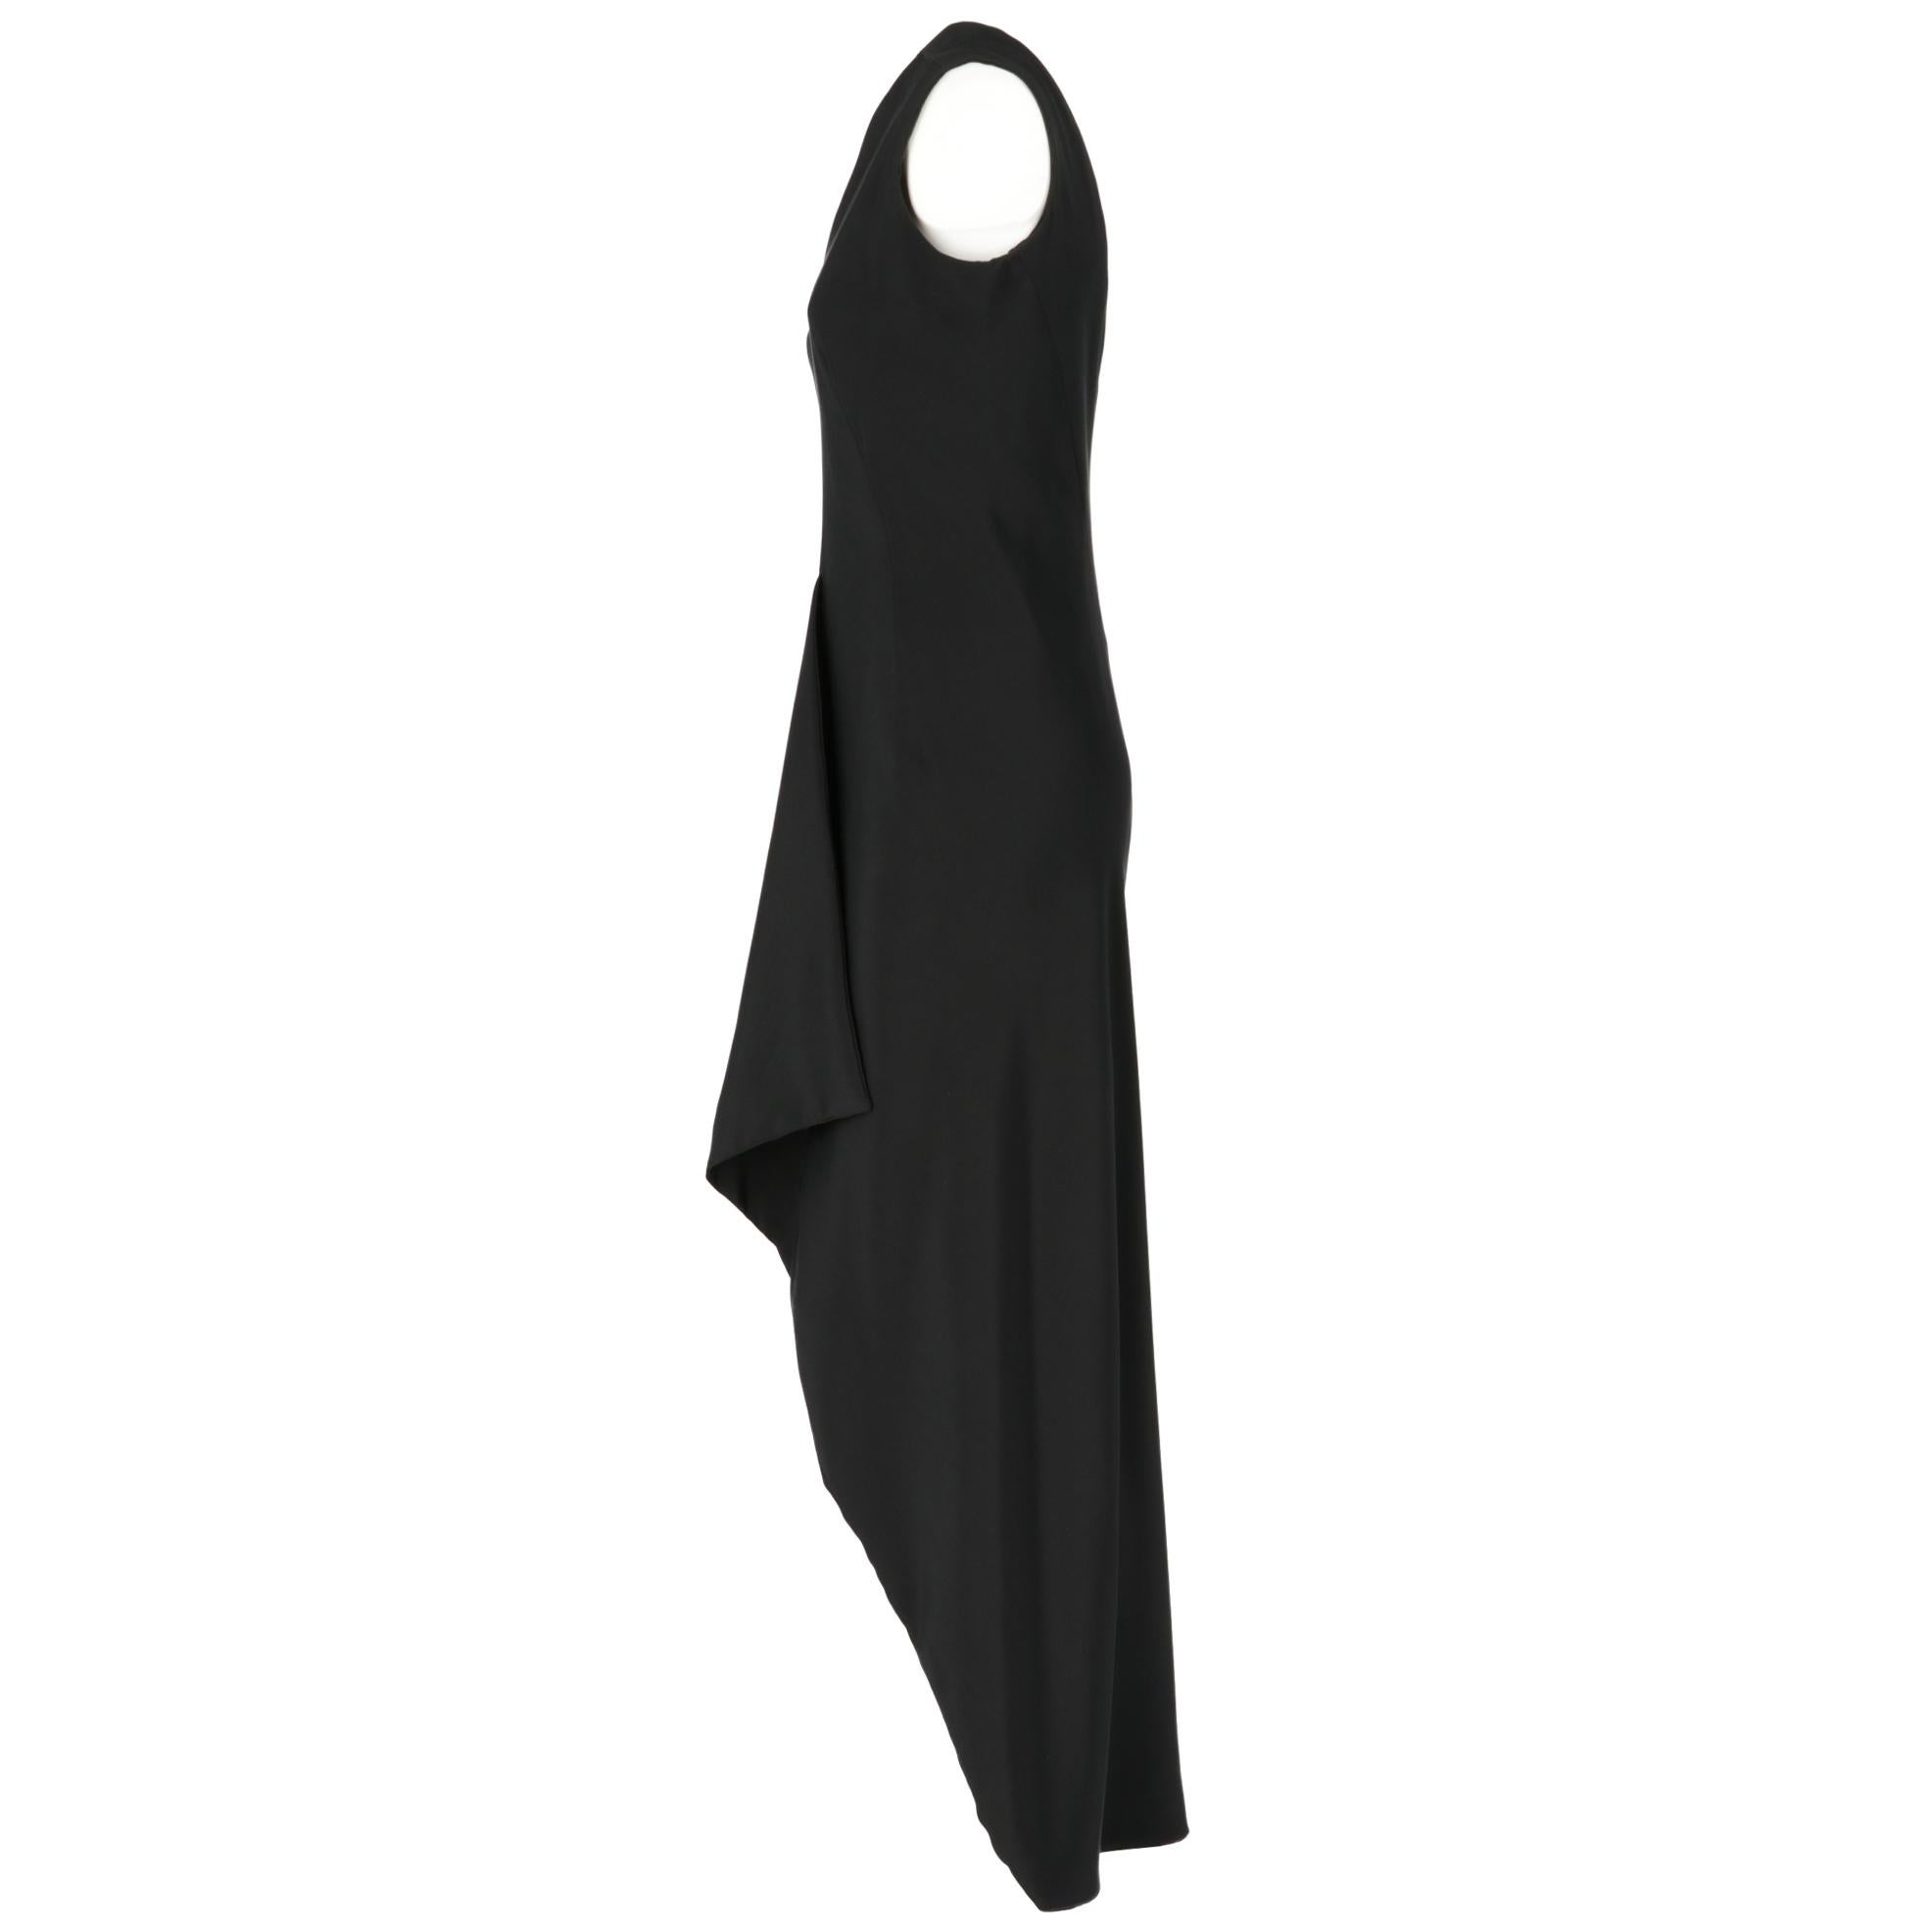 Long sleeveless Lady Florence dress in black silk, fancy design on the front, front open slit, the back part is long to the feet, fitted bust and lightly flared skirt, front and back V neckline and interior lined.
Years: 60s

Made in Italy -